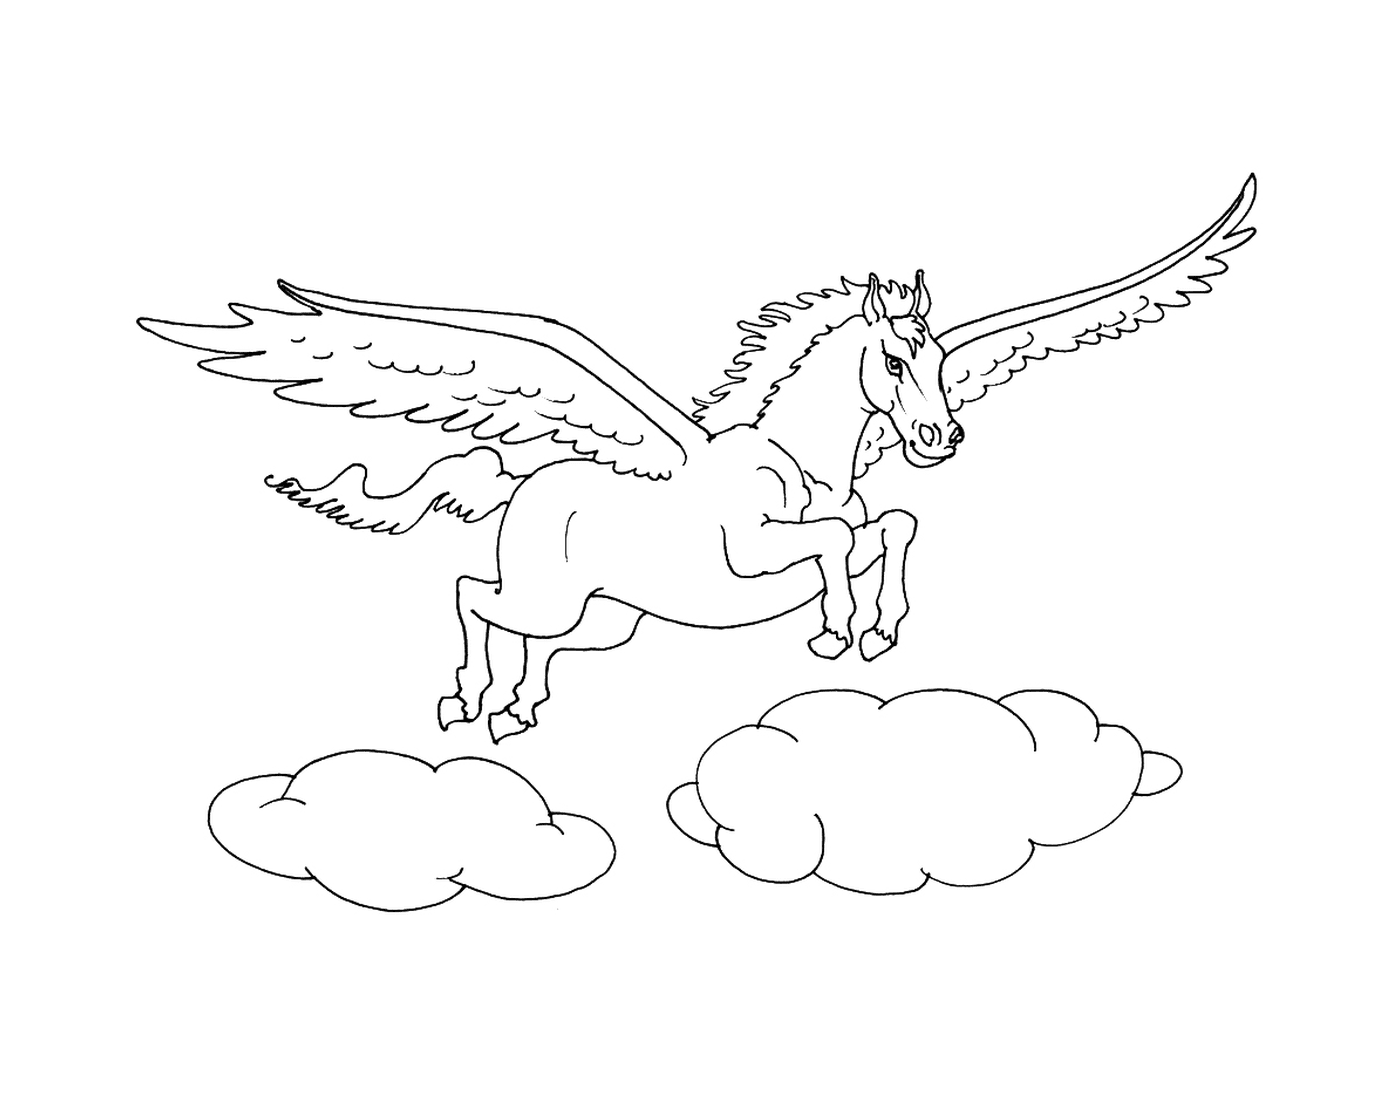  winged horse flying over clouds 